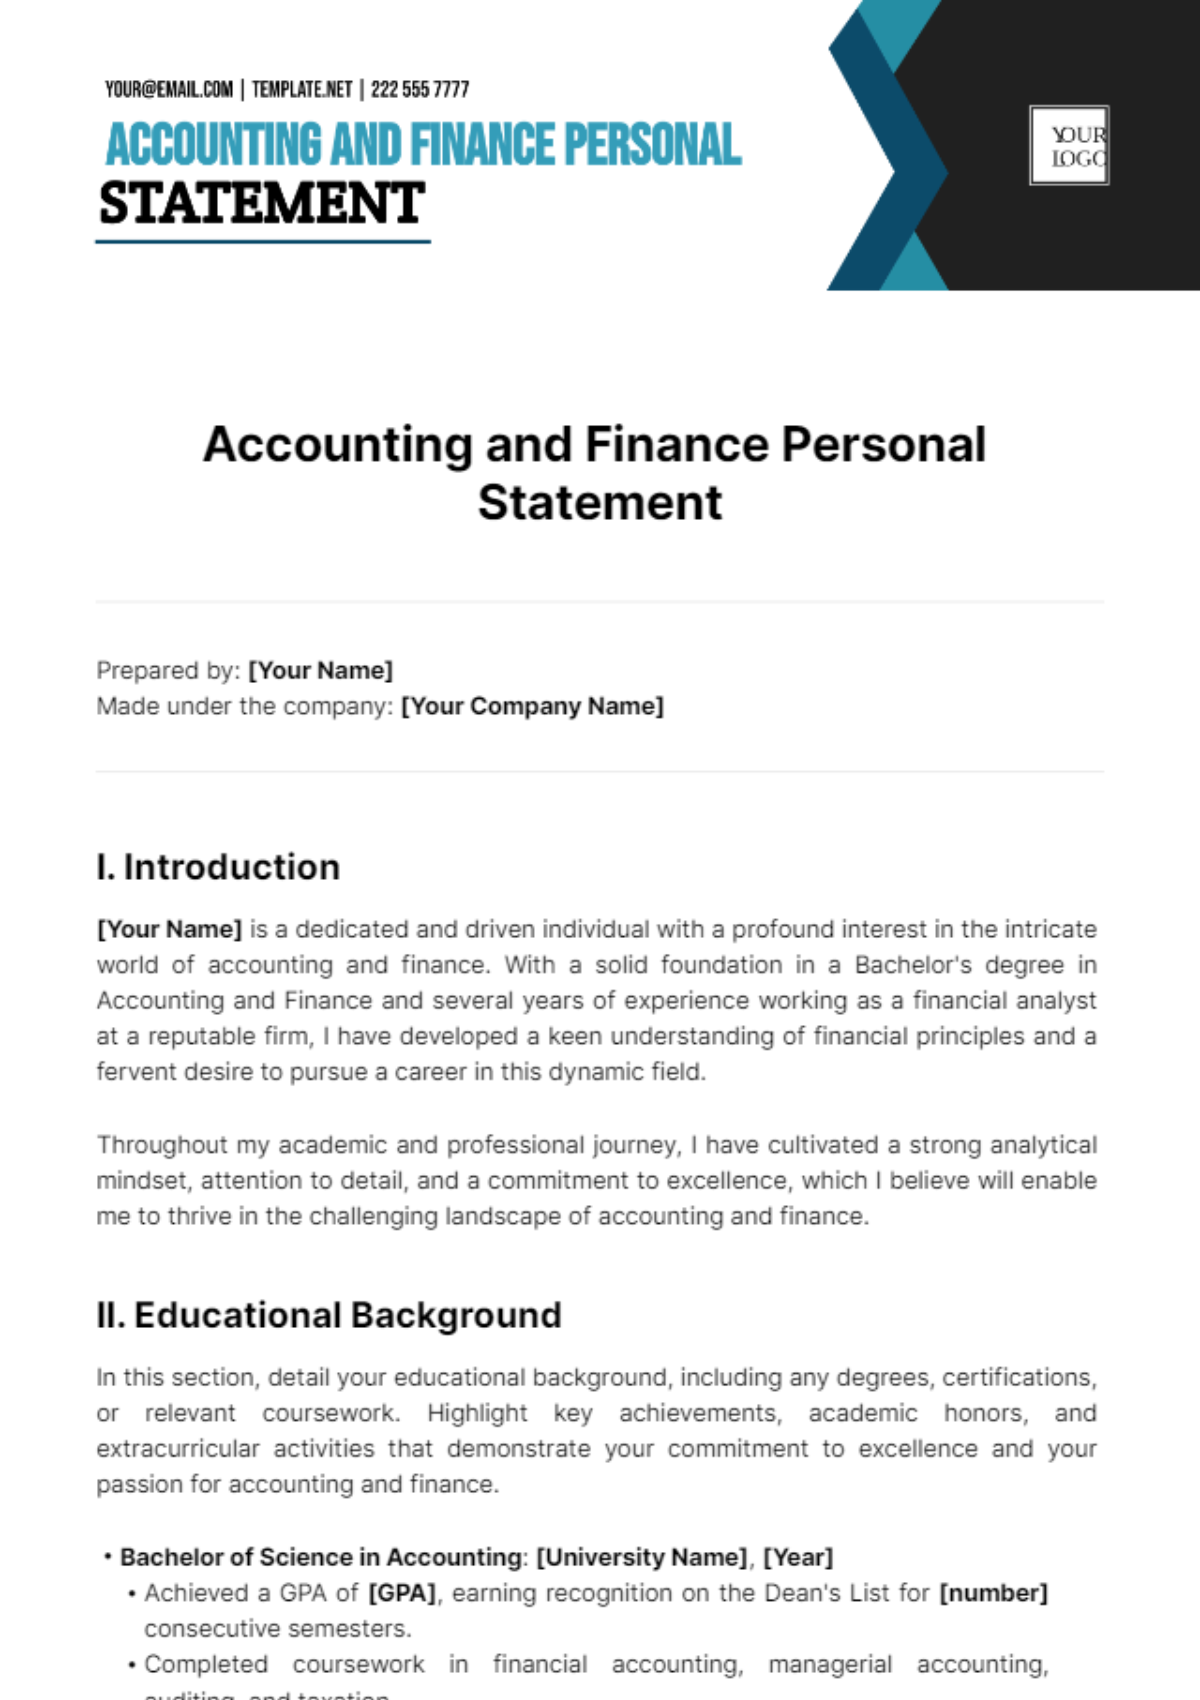 Accounting and Finance Personal Statement Template